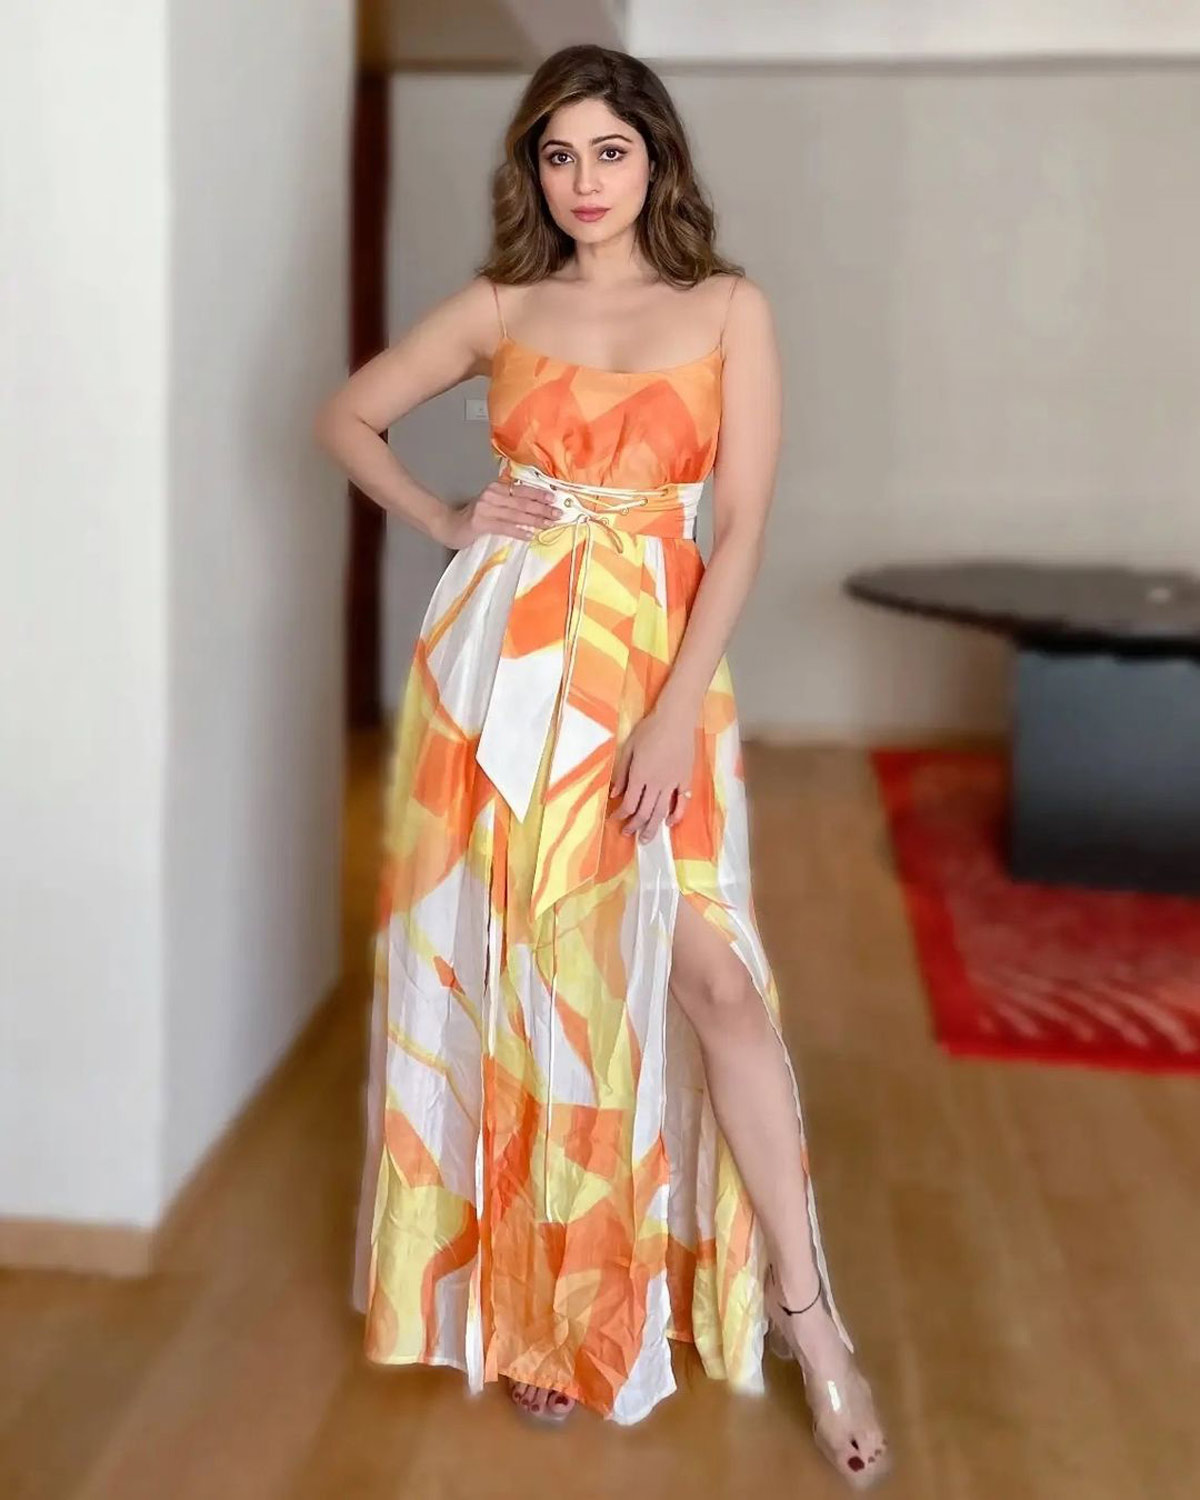 Shamita Shetty sets the red carpet on fire in orange backless gown  featuring high slit Shilpa Shetty says hawtie  Fashion Trends   Hindustan Times